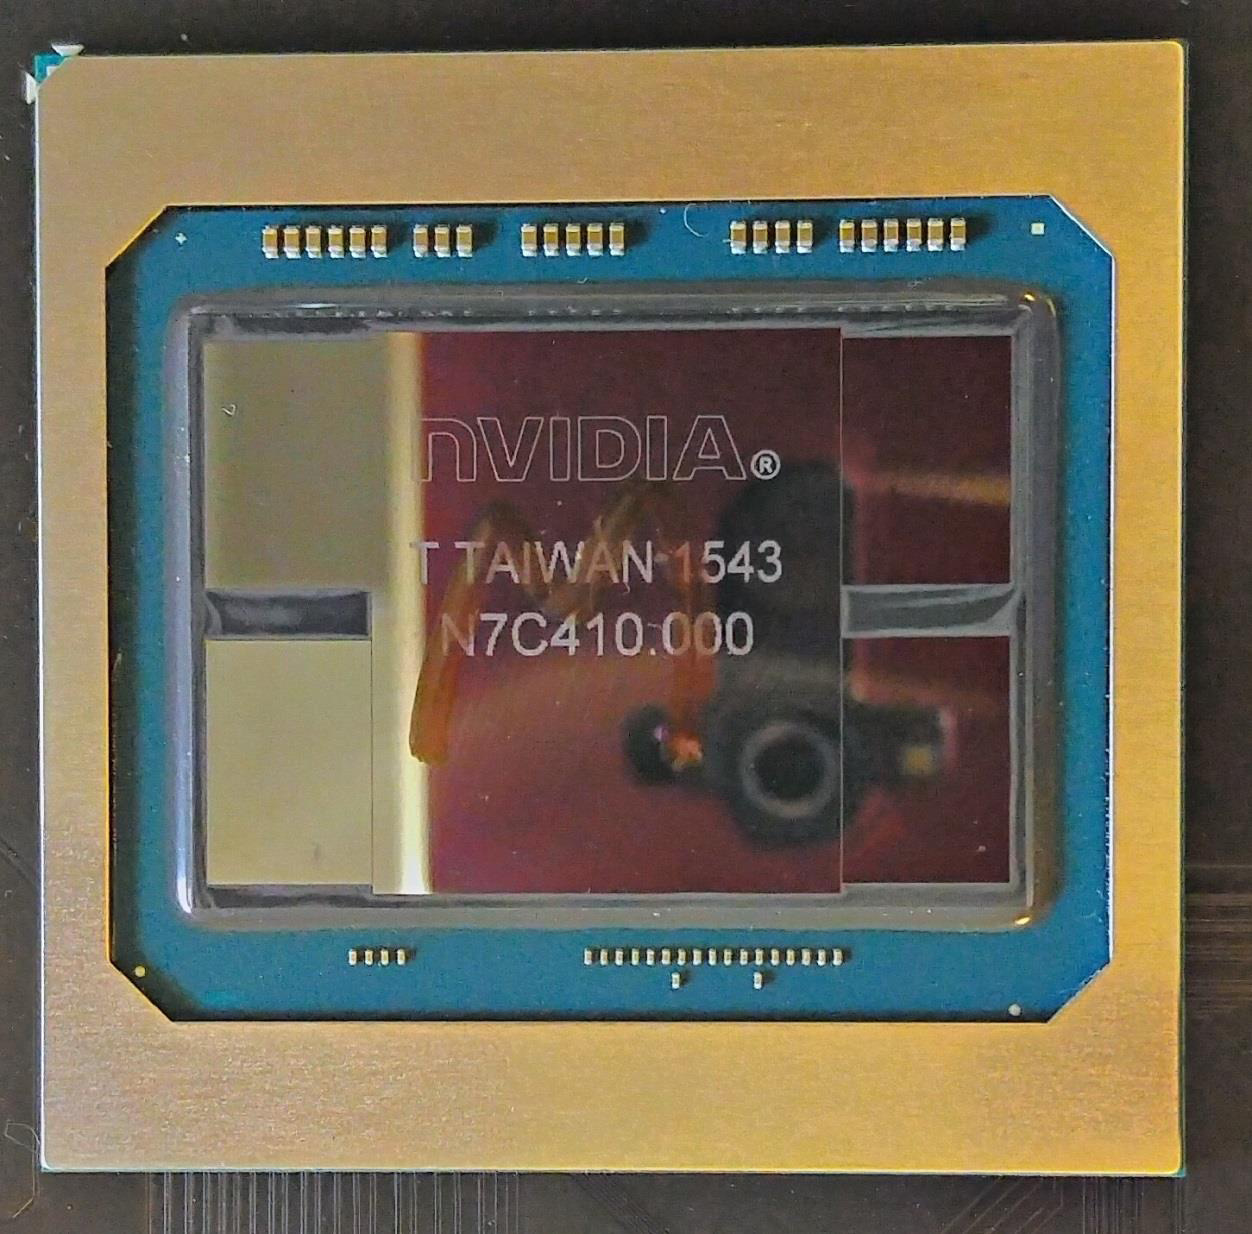 Media asset in full size related to 3dfxzone.it news item entitled as follows: Foto del die e del package della GPU Big Pascal GP100 di NVIDIA | Image Name: news24818_NVIDIA-GP100-die-Chip_2.jpg